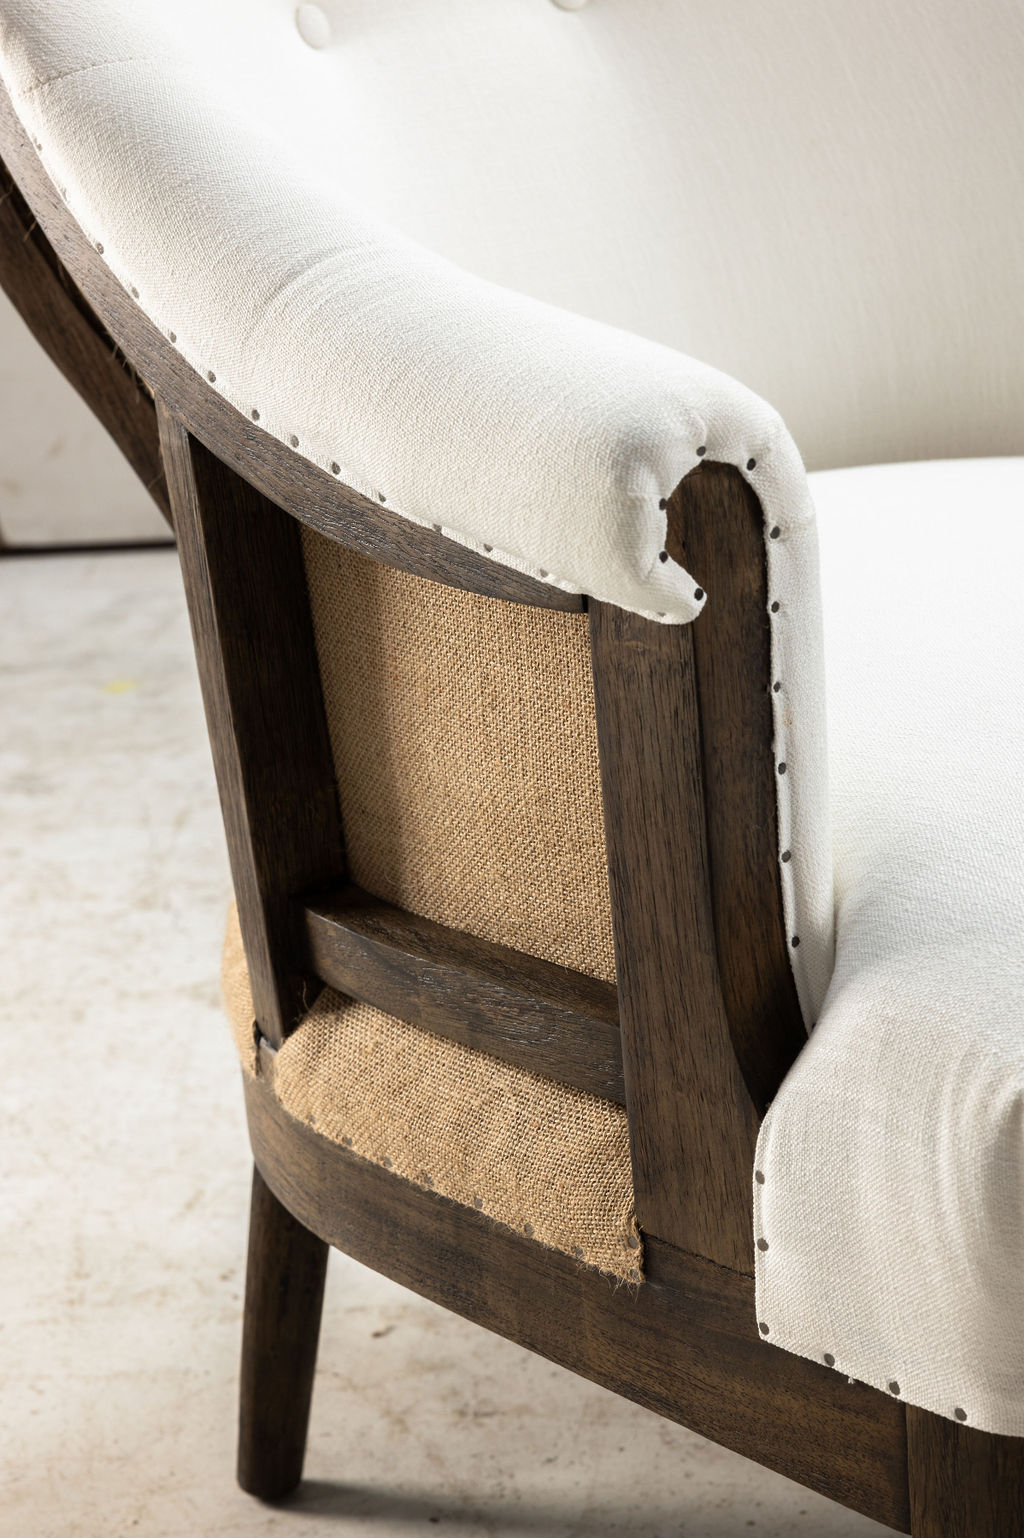 cream upholstered deconstructed chair on castors 